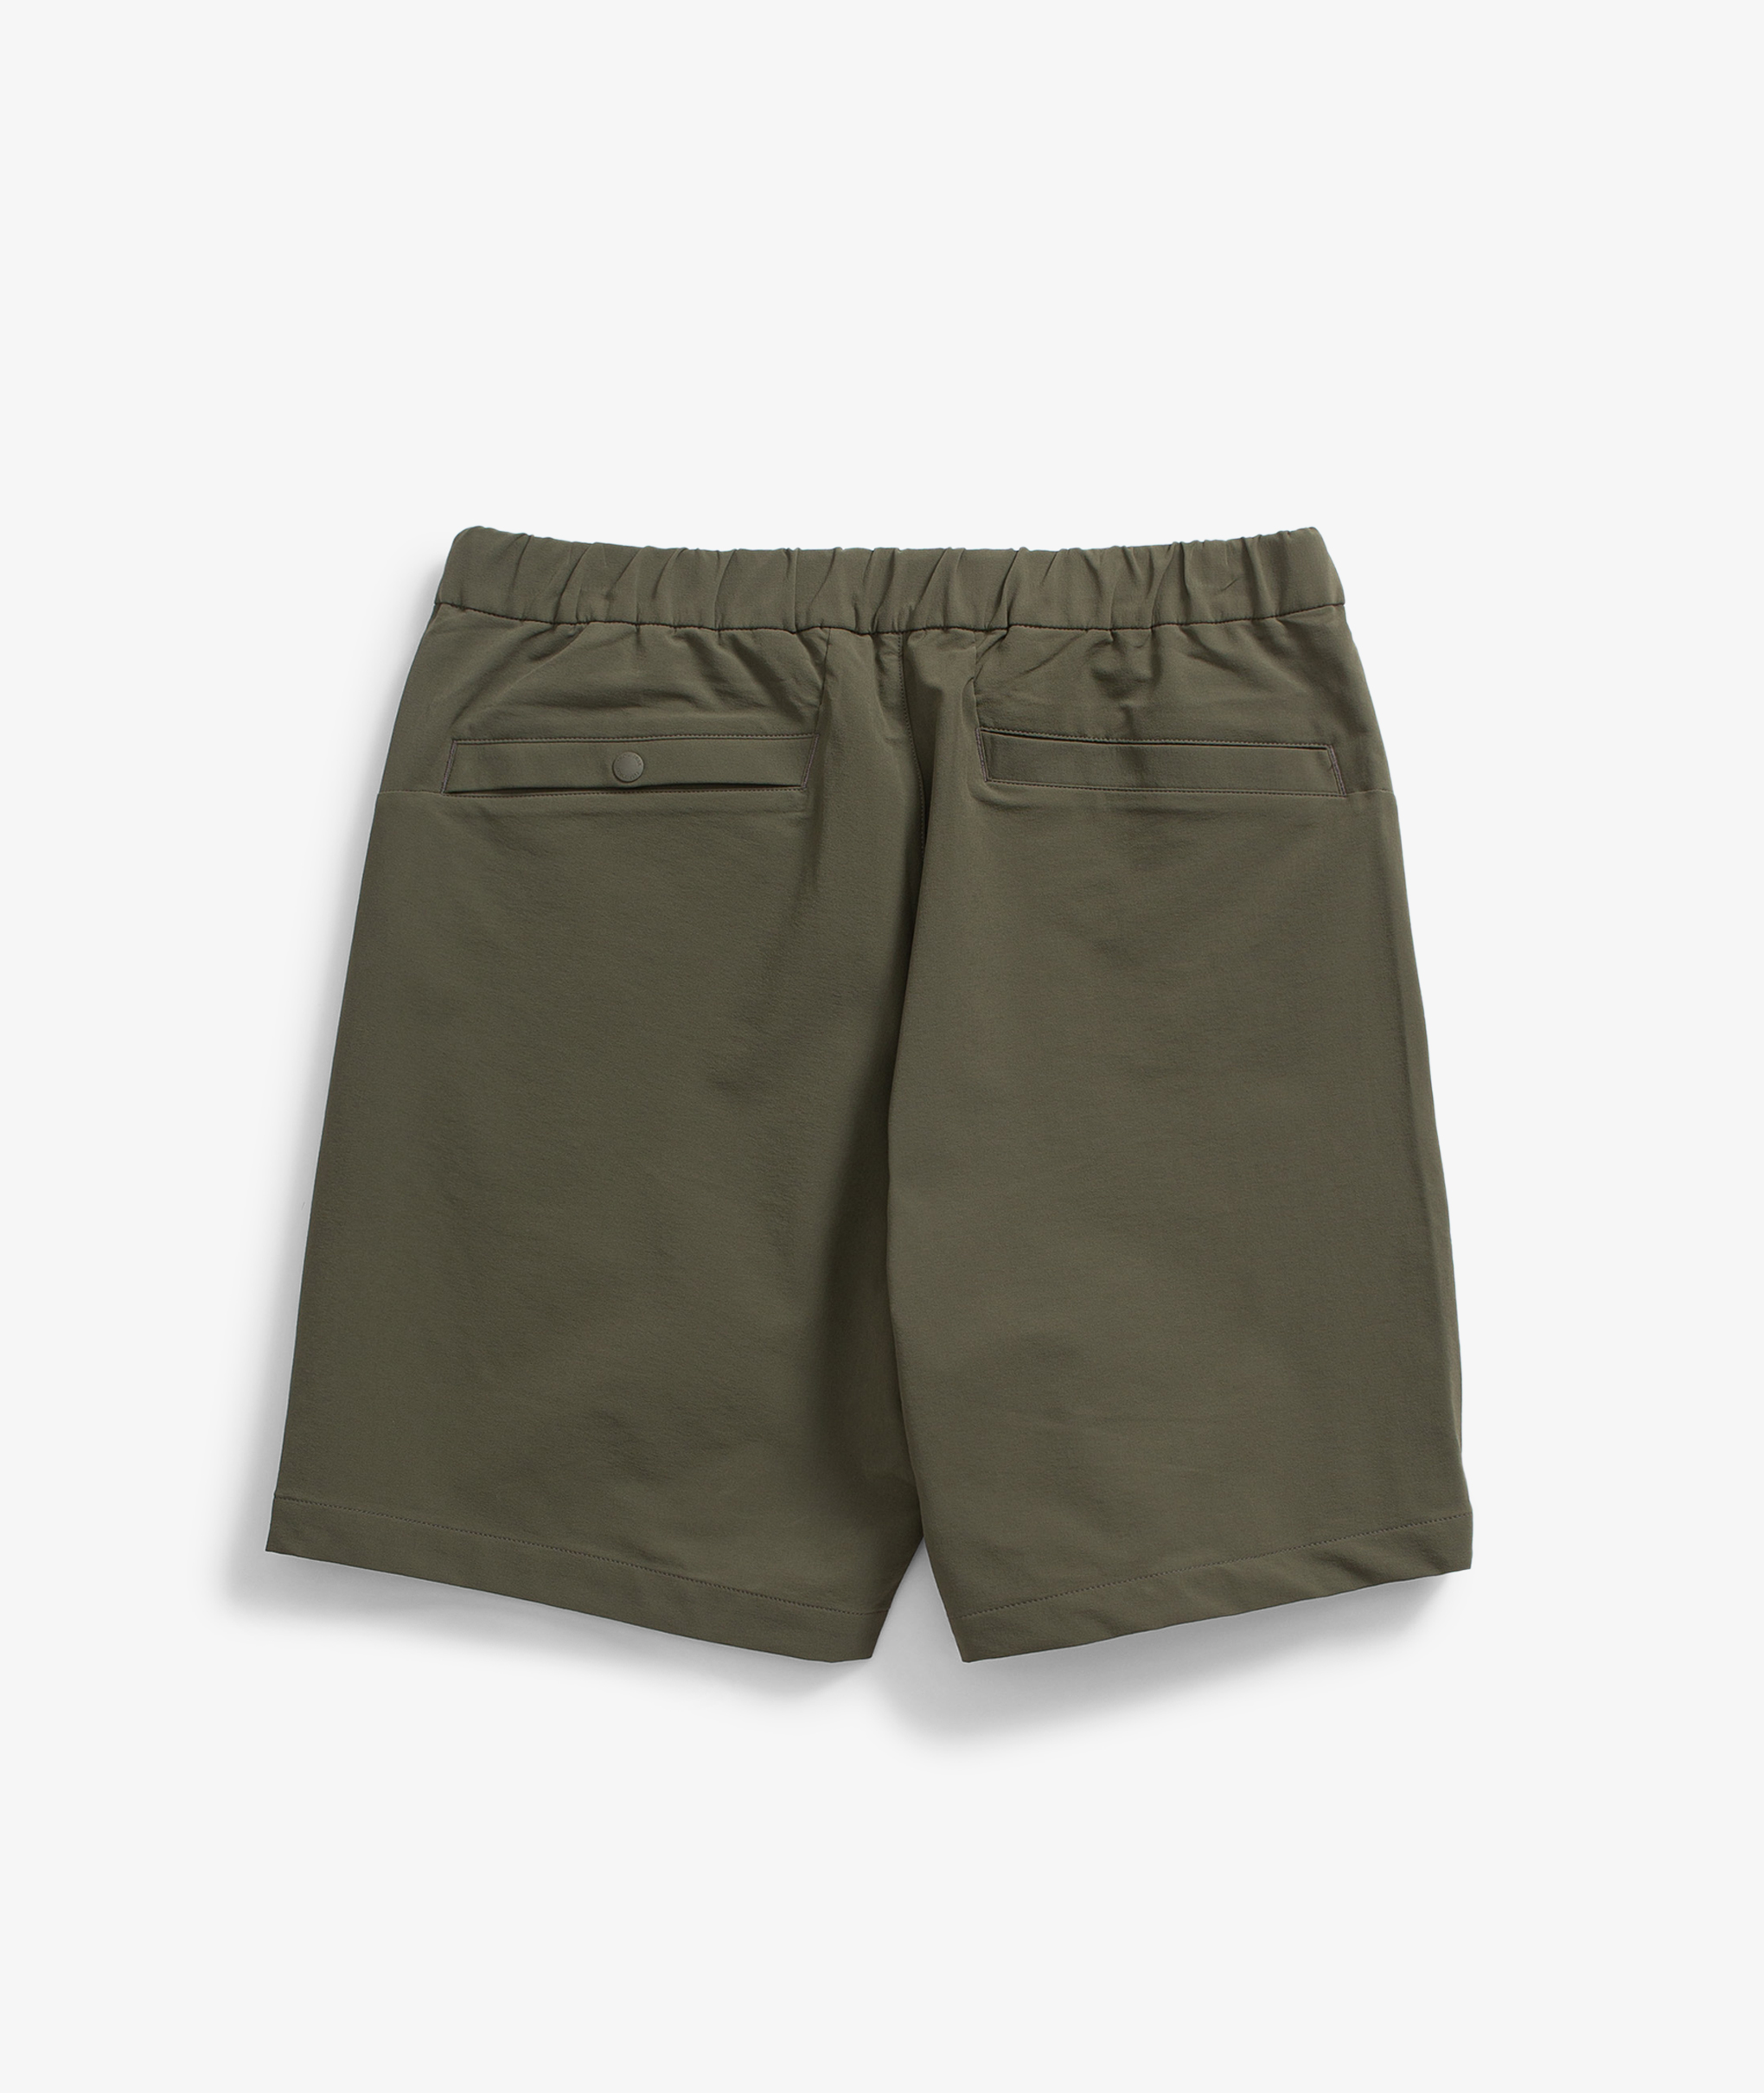 Norse Store | Shipping Worldwide - Snow Peak DWR Comfort Shorts